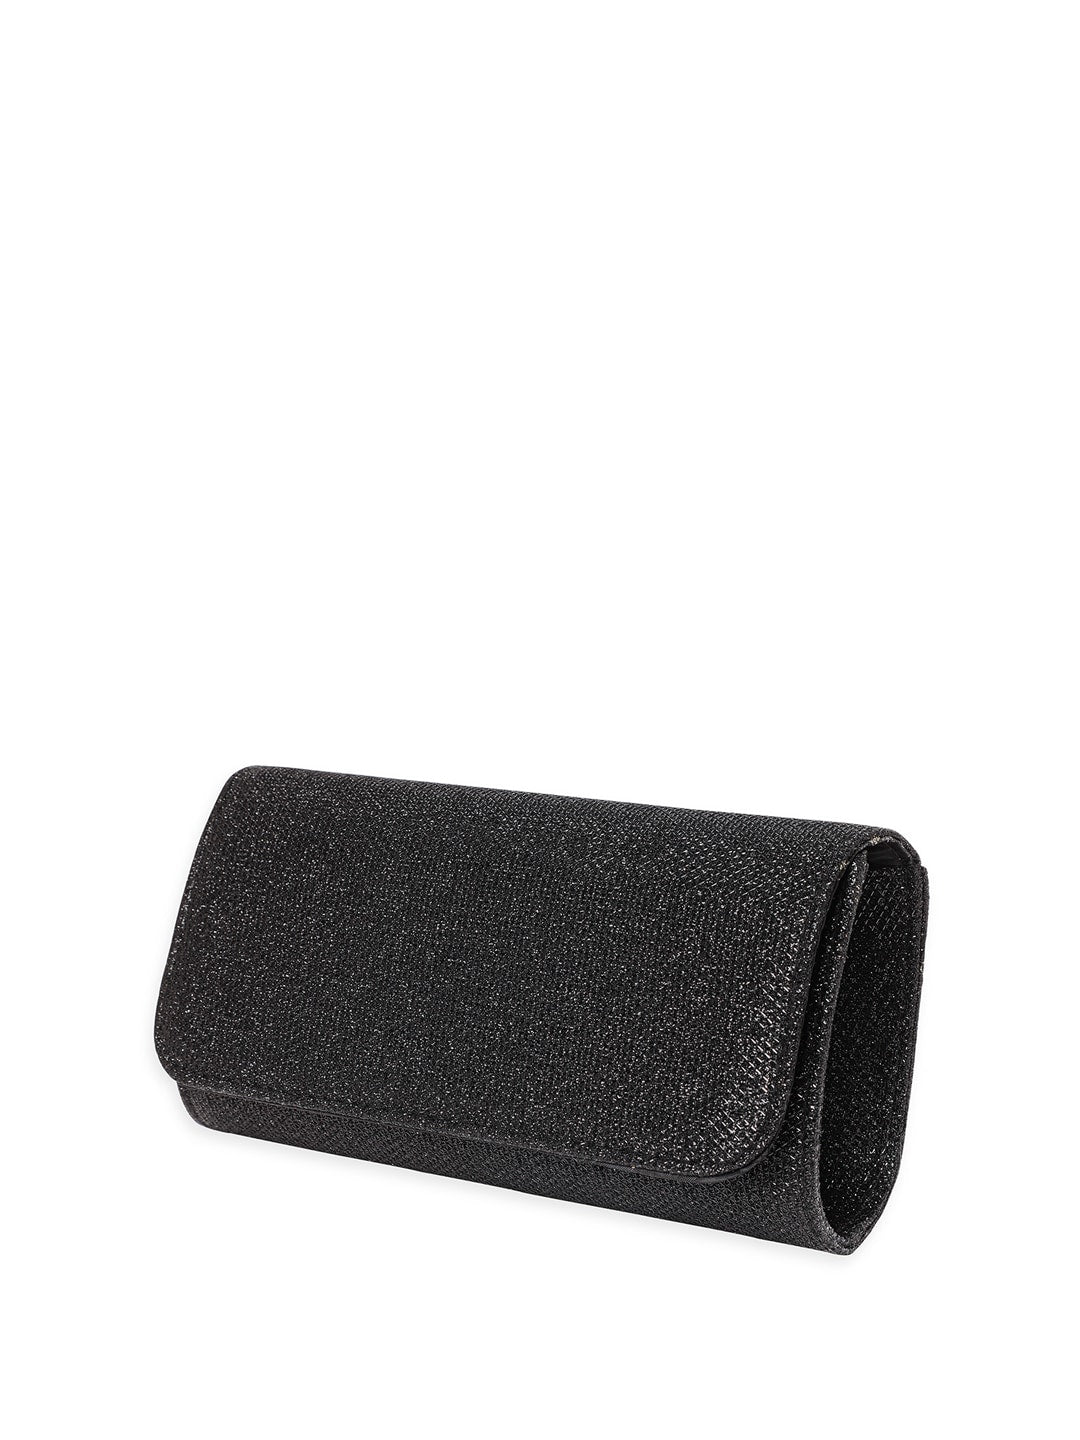 Rubans Textured Shimmery Foldover Clutch With Shoulder Strap - Distacart